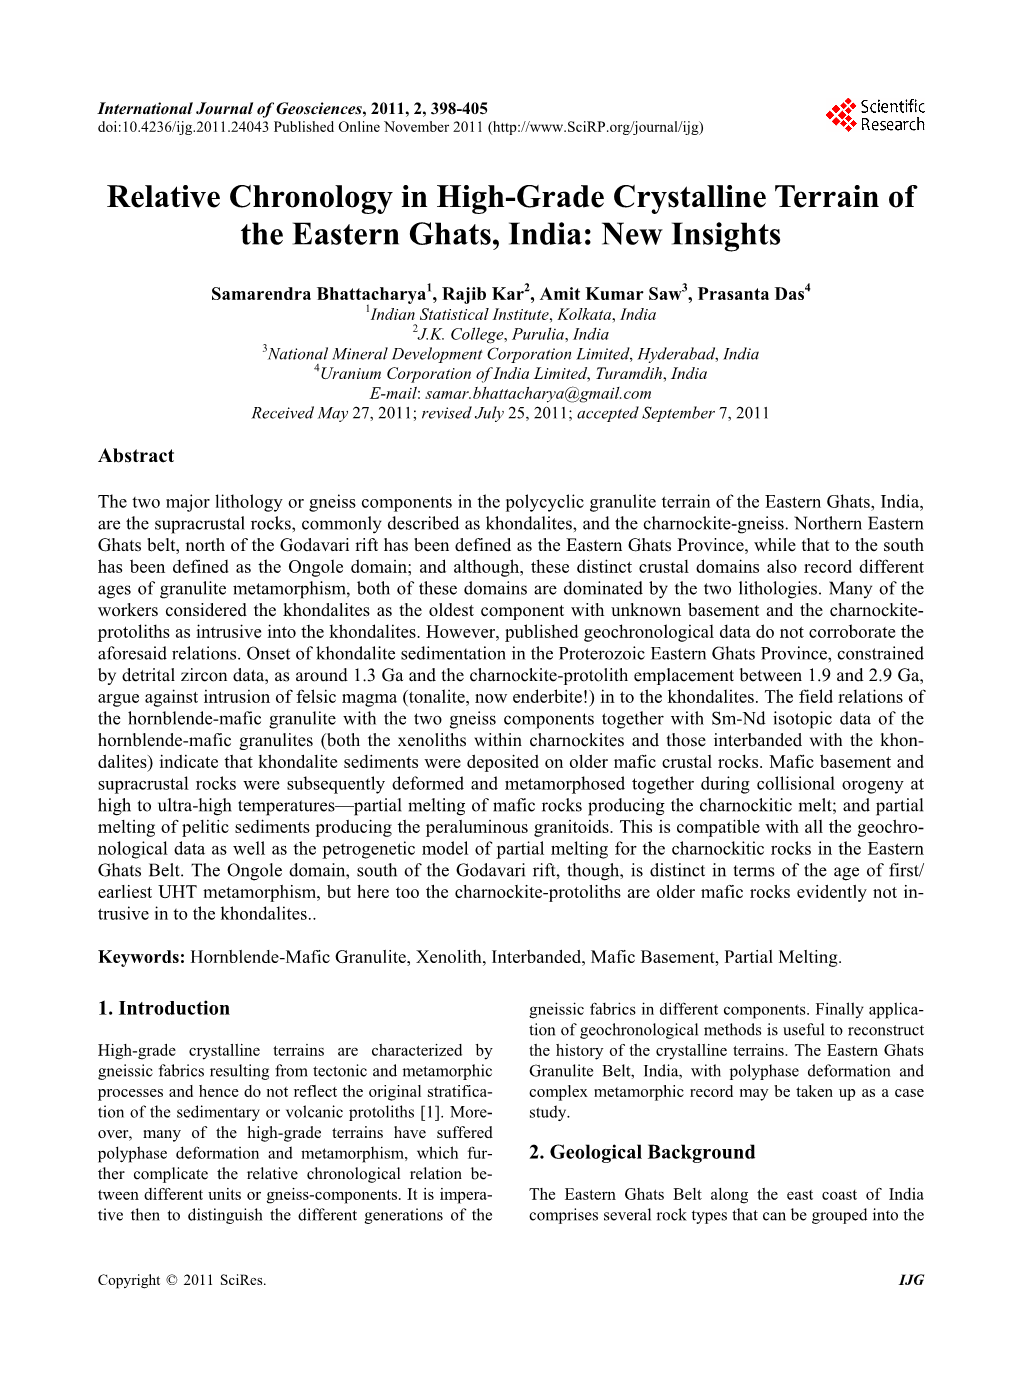 Relative Chronology in High-Grade Crystalline Terrain of the Eastern Ghats, India: New Insights